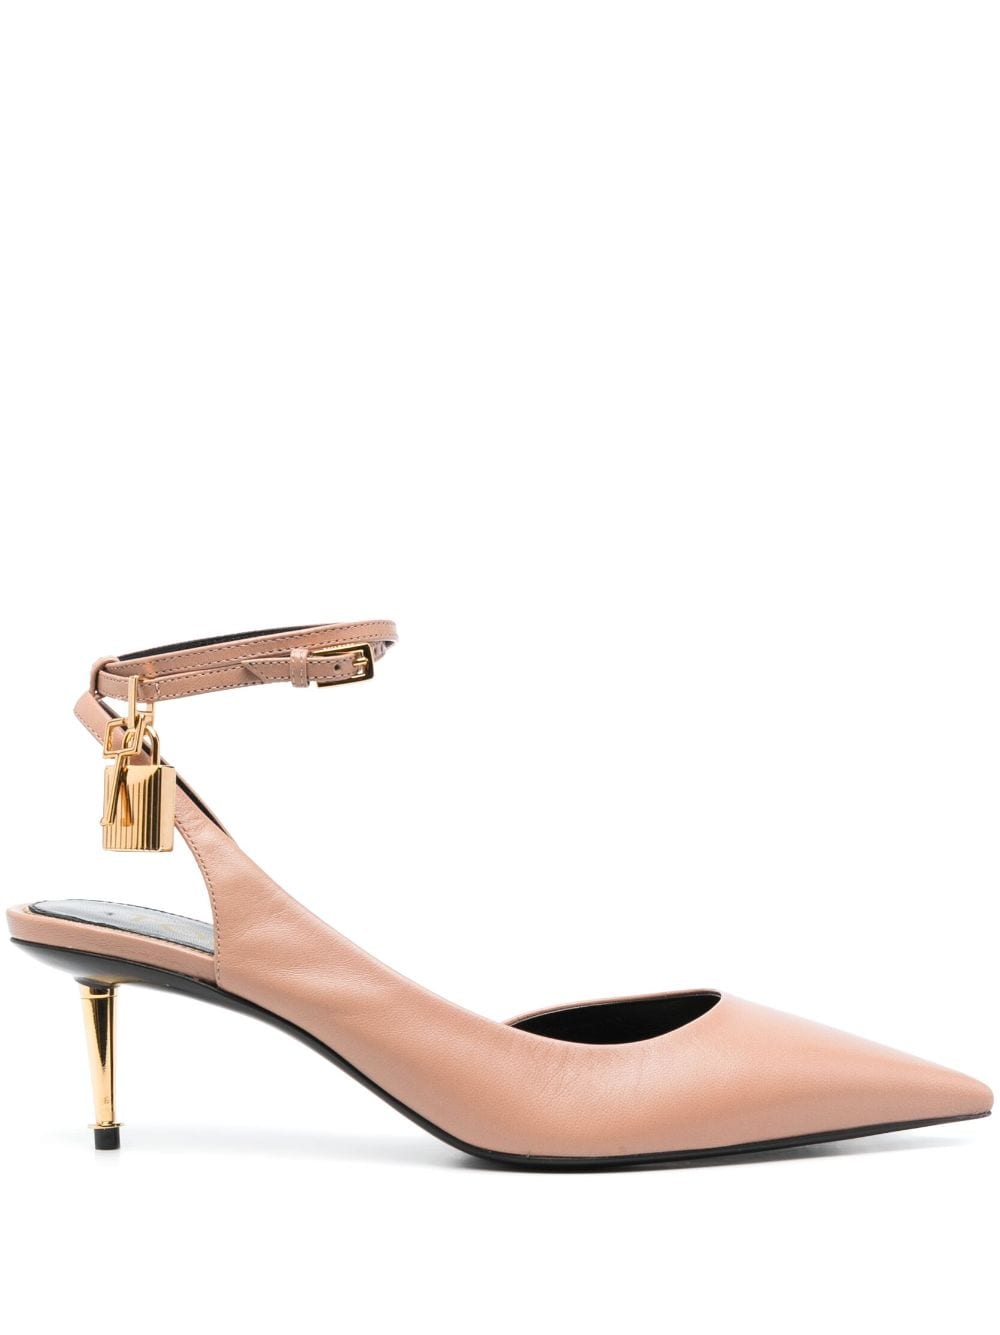 TOM FORD Padlock slingback 55mm pumps price in Egypt | Compare Prices